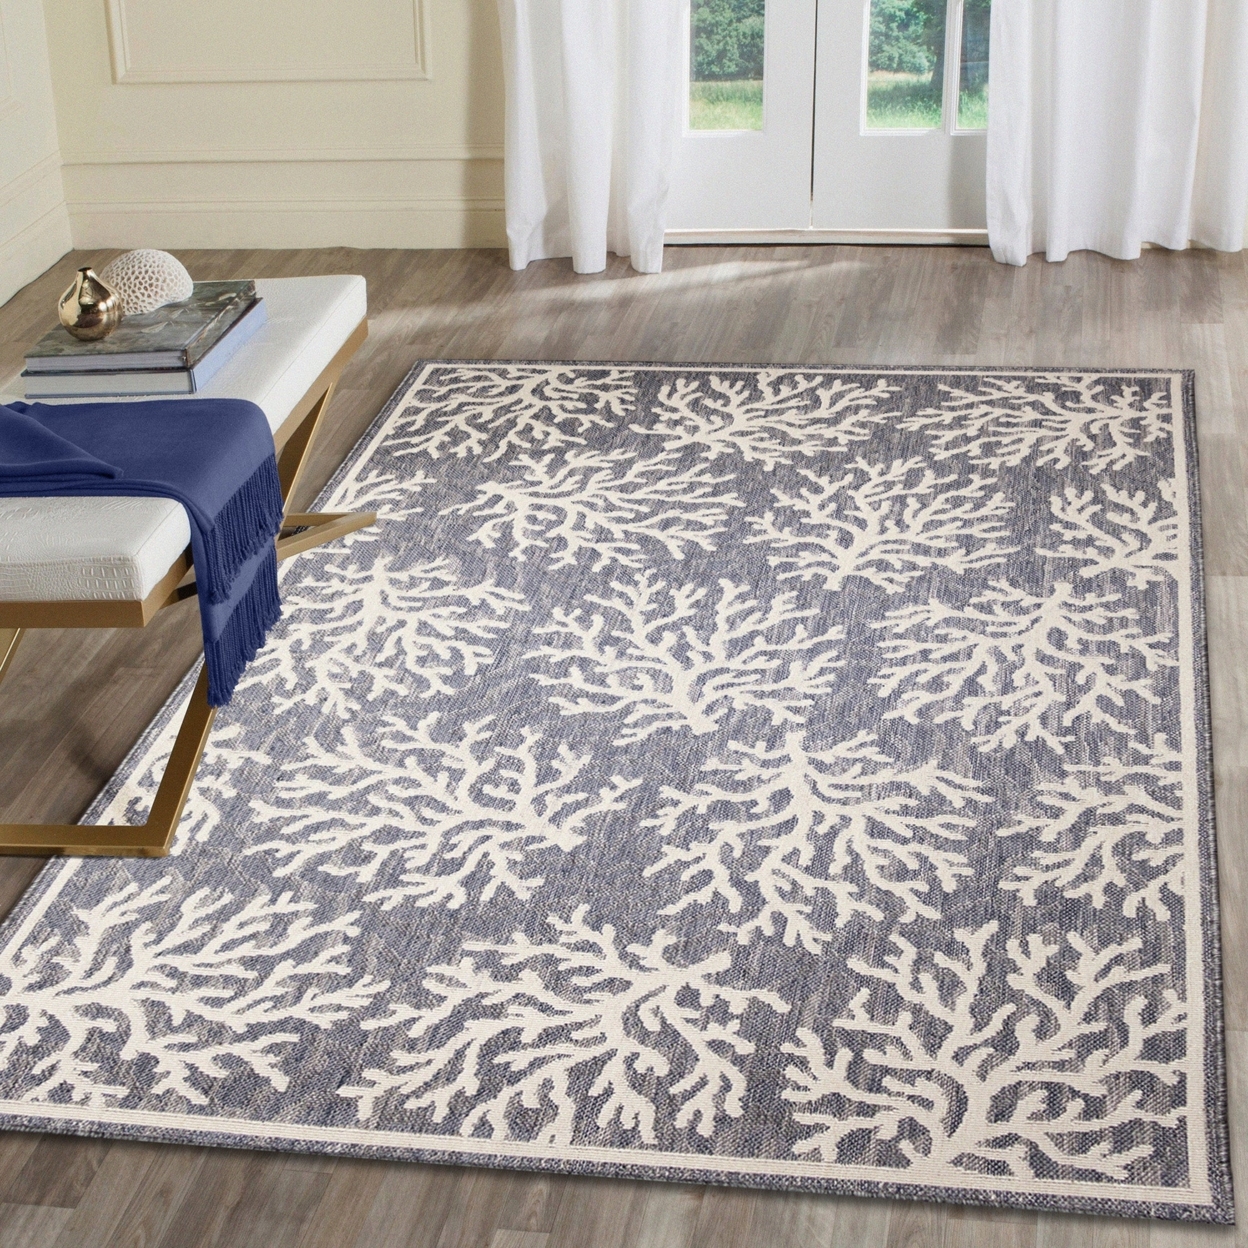 Liora Manne Cove Coral Indoor Outdoor Area Rug Blue - 5'3 X 7'3